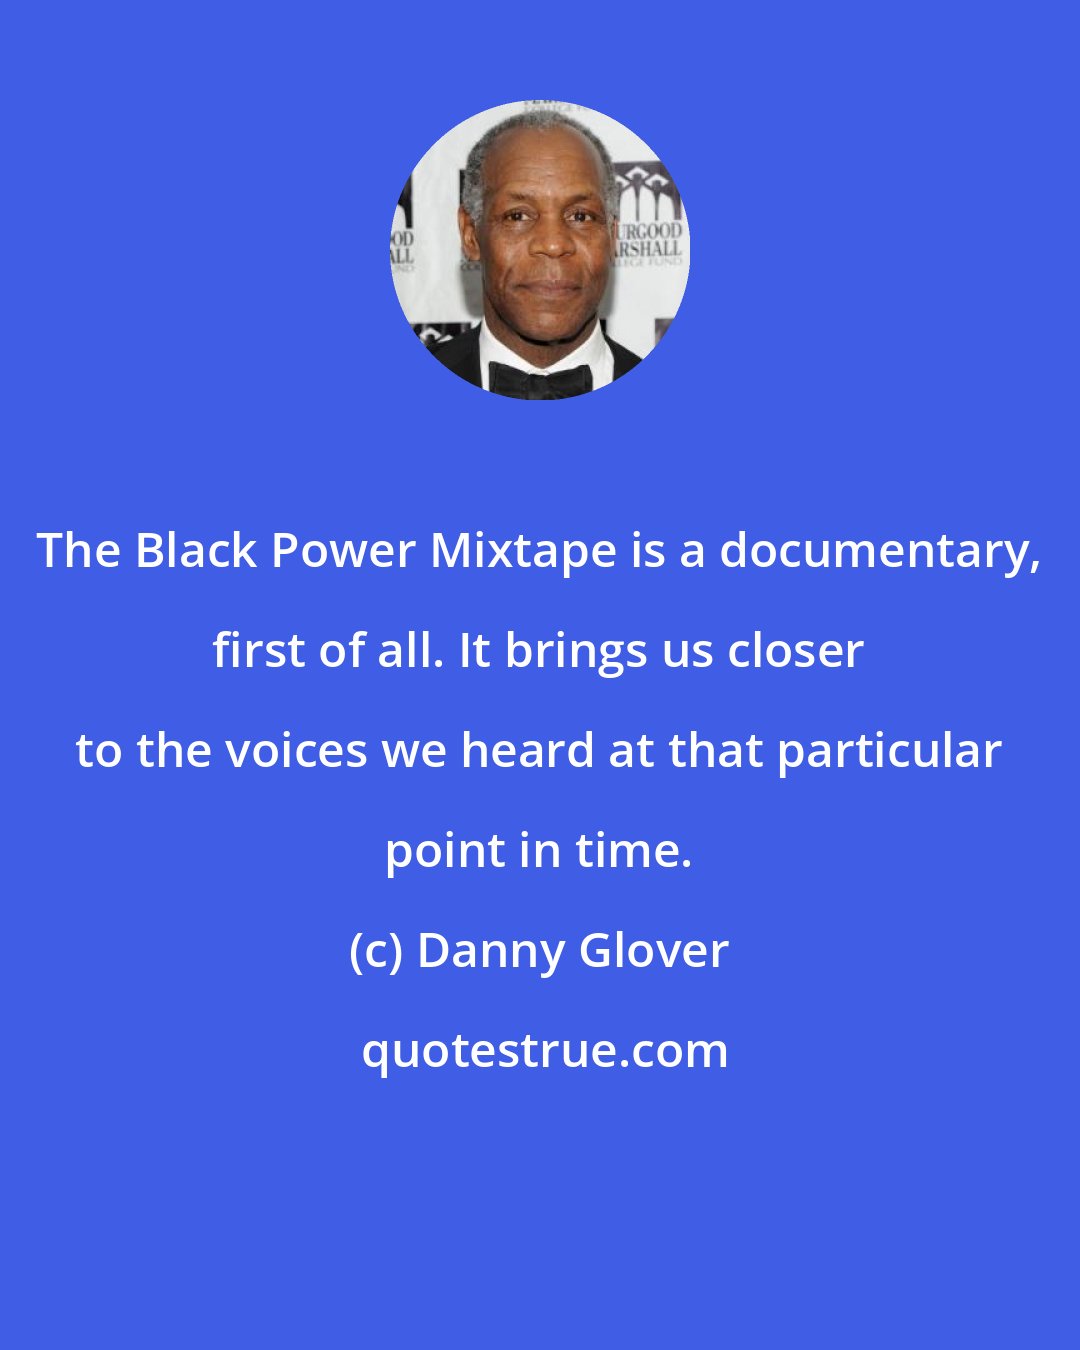 Danny Glover: The Black Power Mixtape is a documentary, first of all. It brings us closer to the voices we heard at that particular point in time.